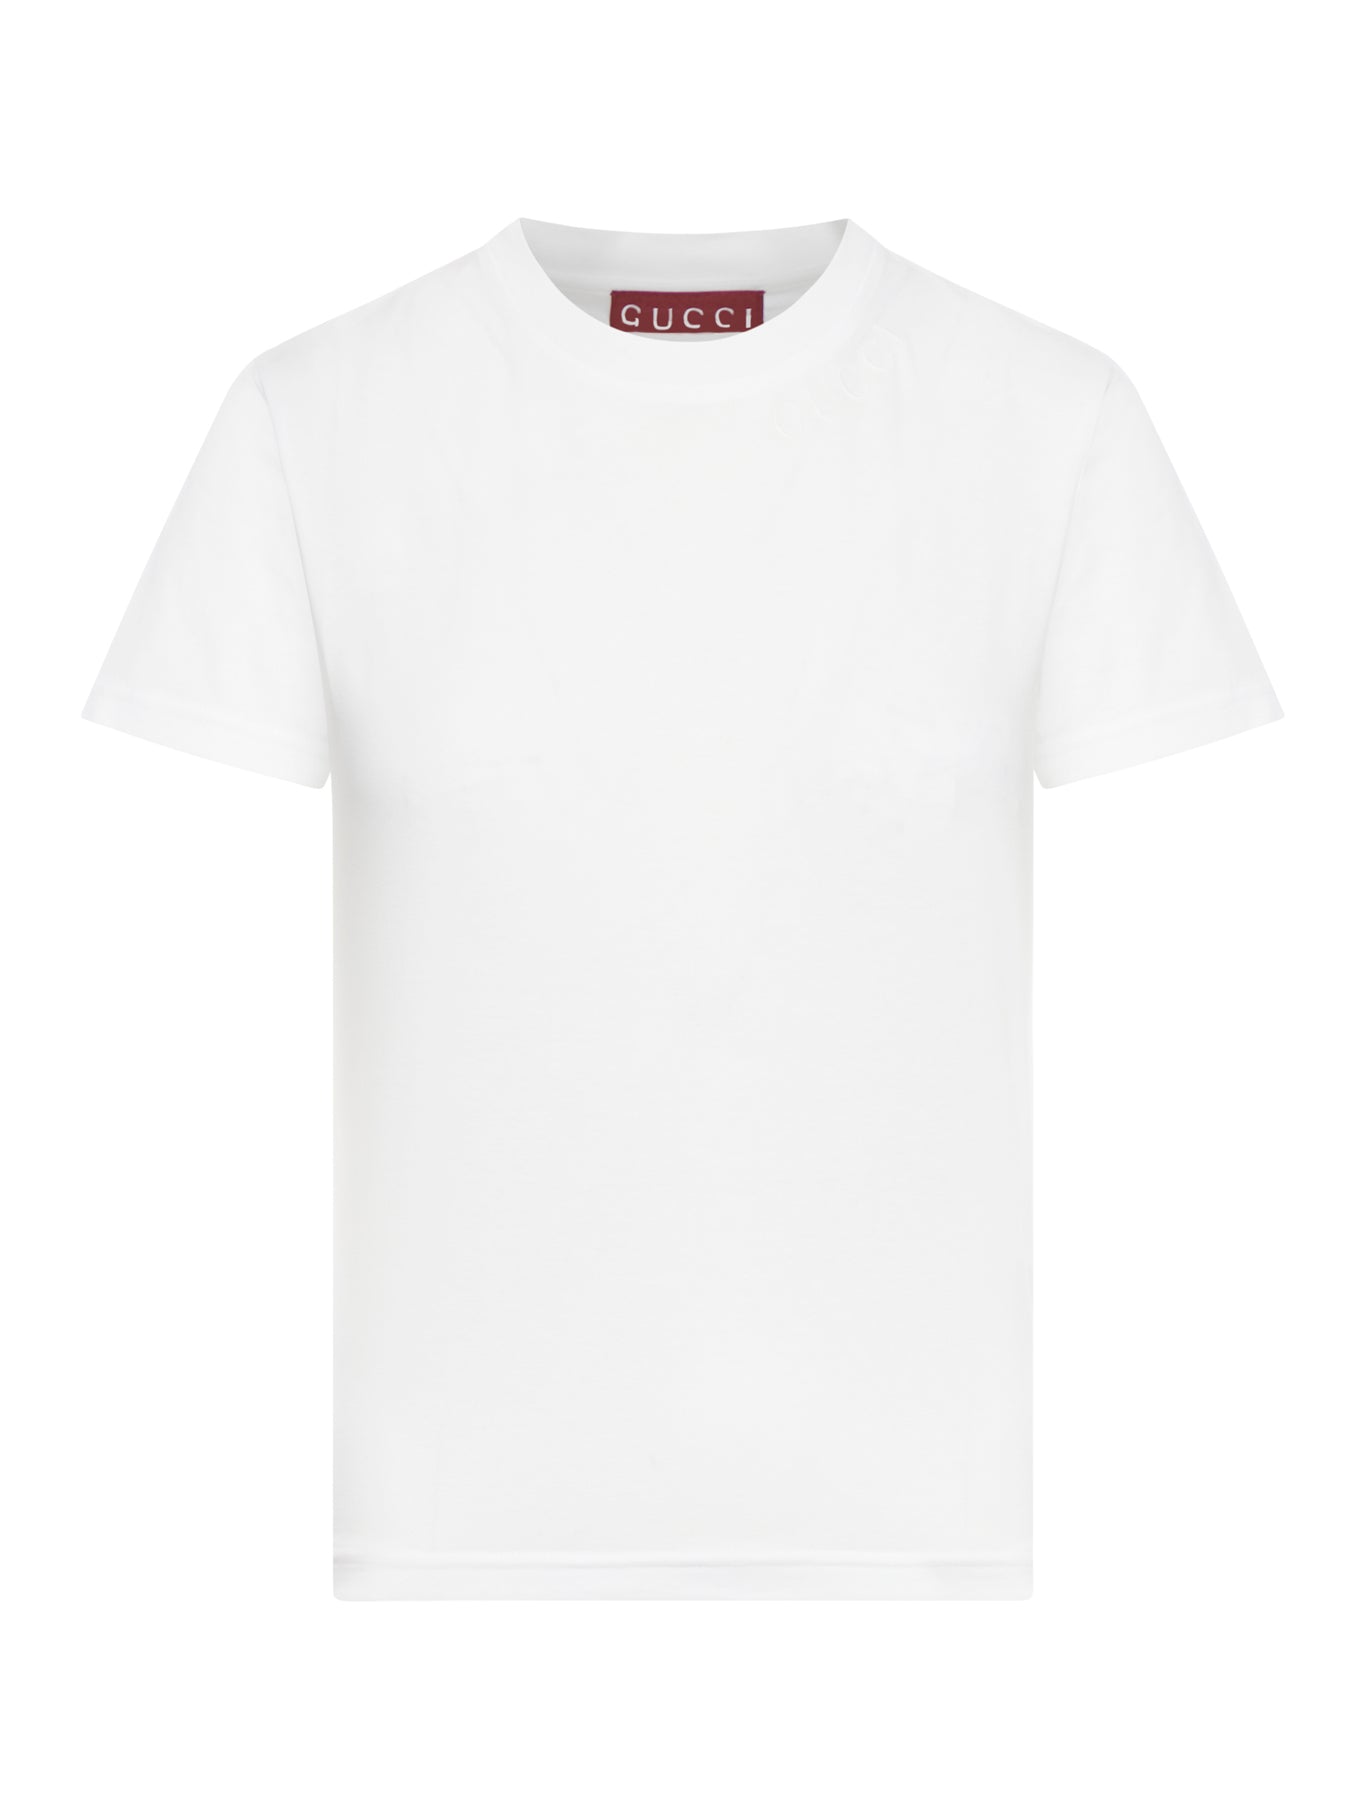 COTTON JERSEY T-SHIRT WITH EMBROIDERY